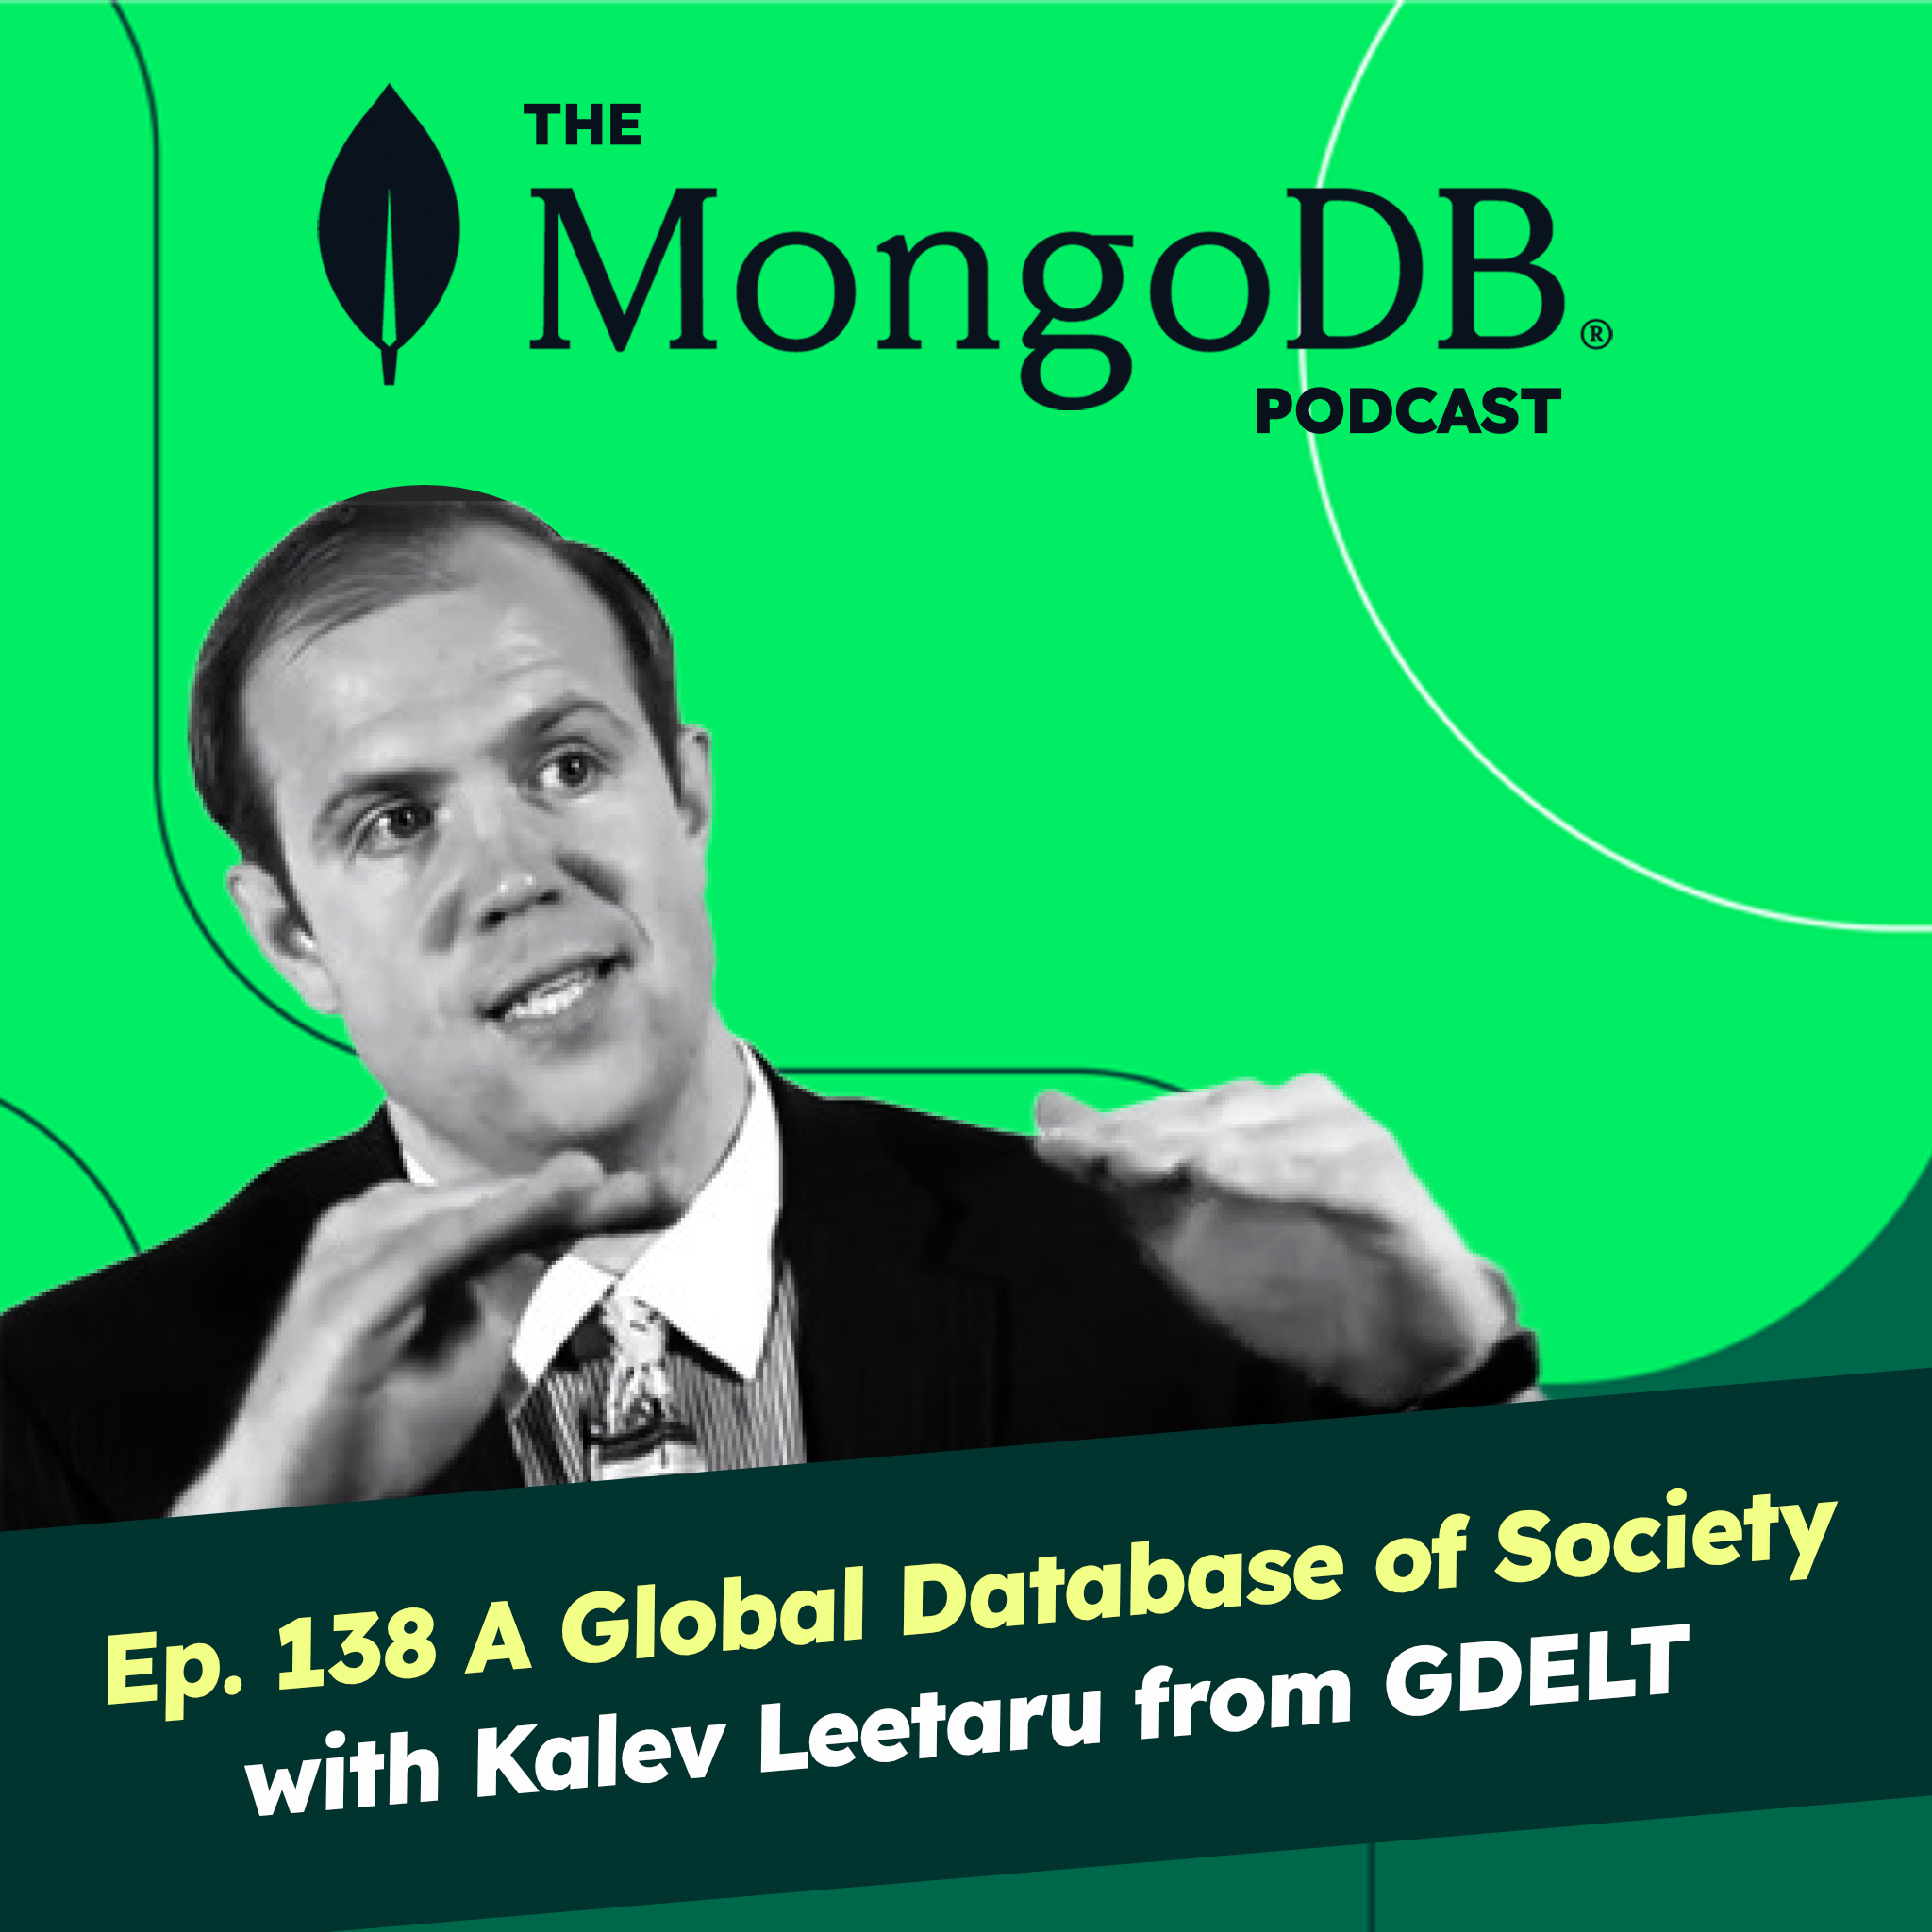 Ep 138 A Global Database of Society with Kalev Leetaru from GDELT